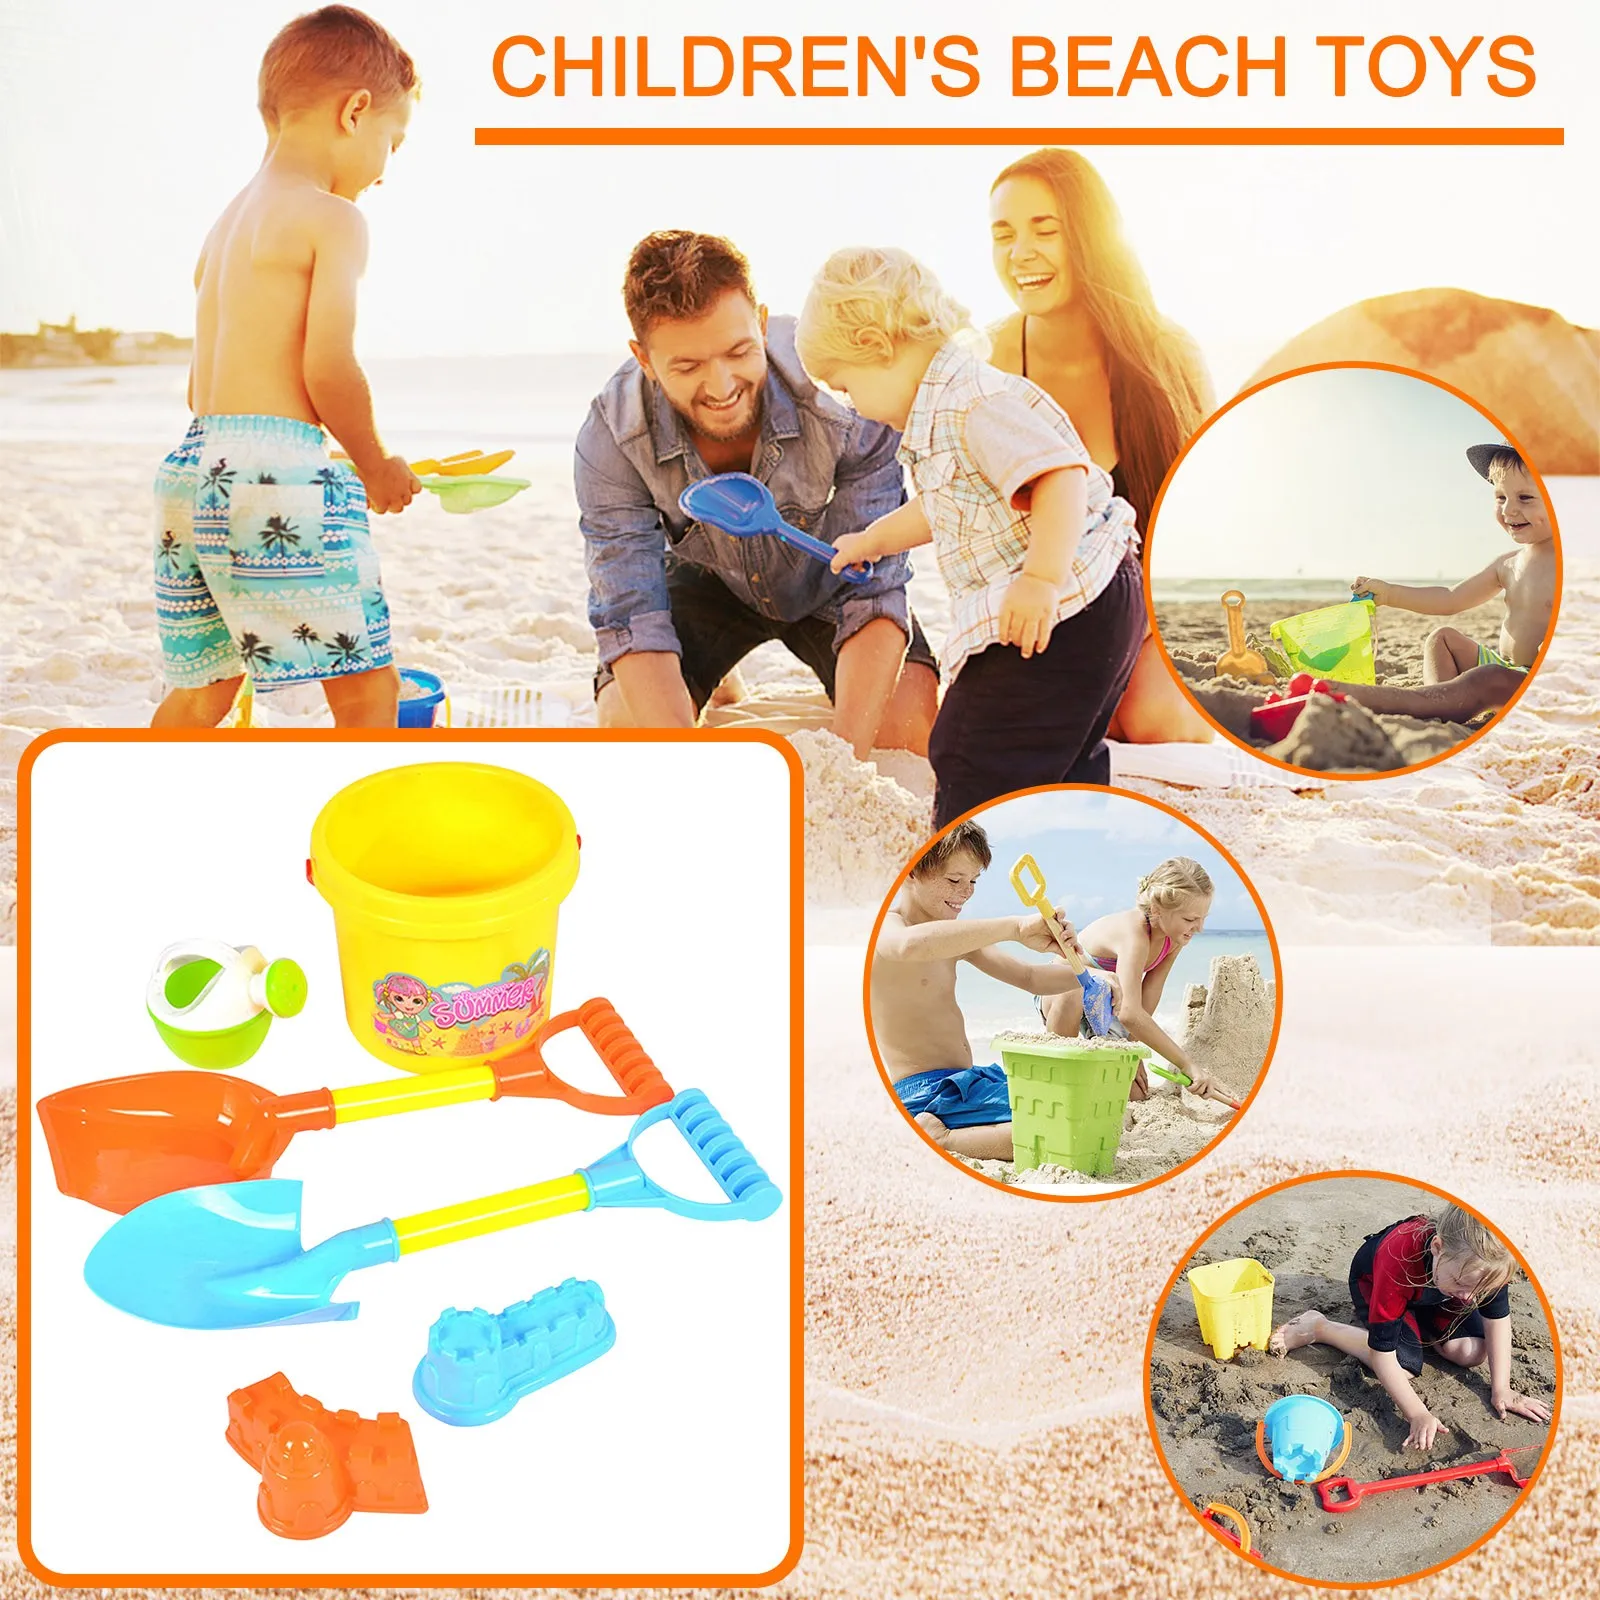 

6 Piece Beach Toy Sand Set Sand Play Sandpit Toys Summer Outdoor Toy Sand Castle Tool Cart Shovels Ducks Bucket Outdoor Toy